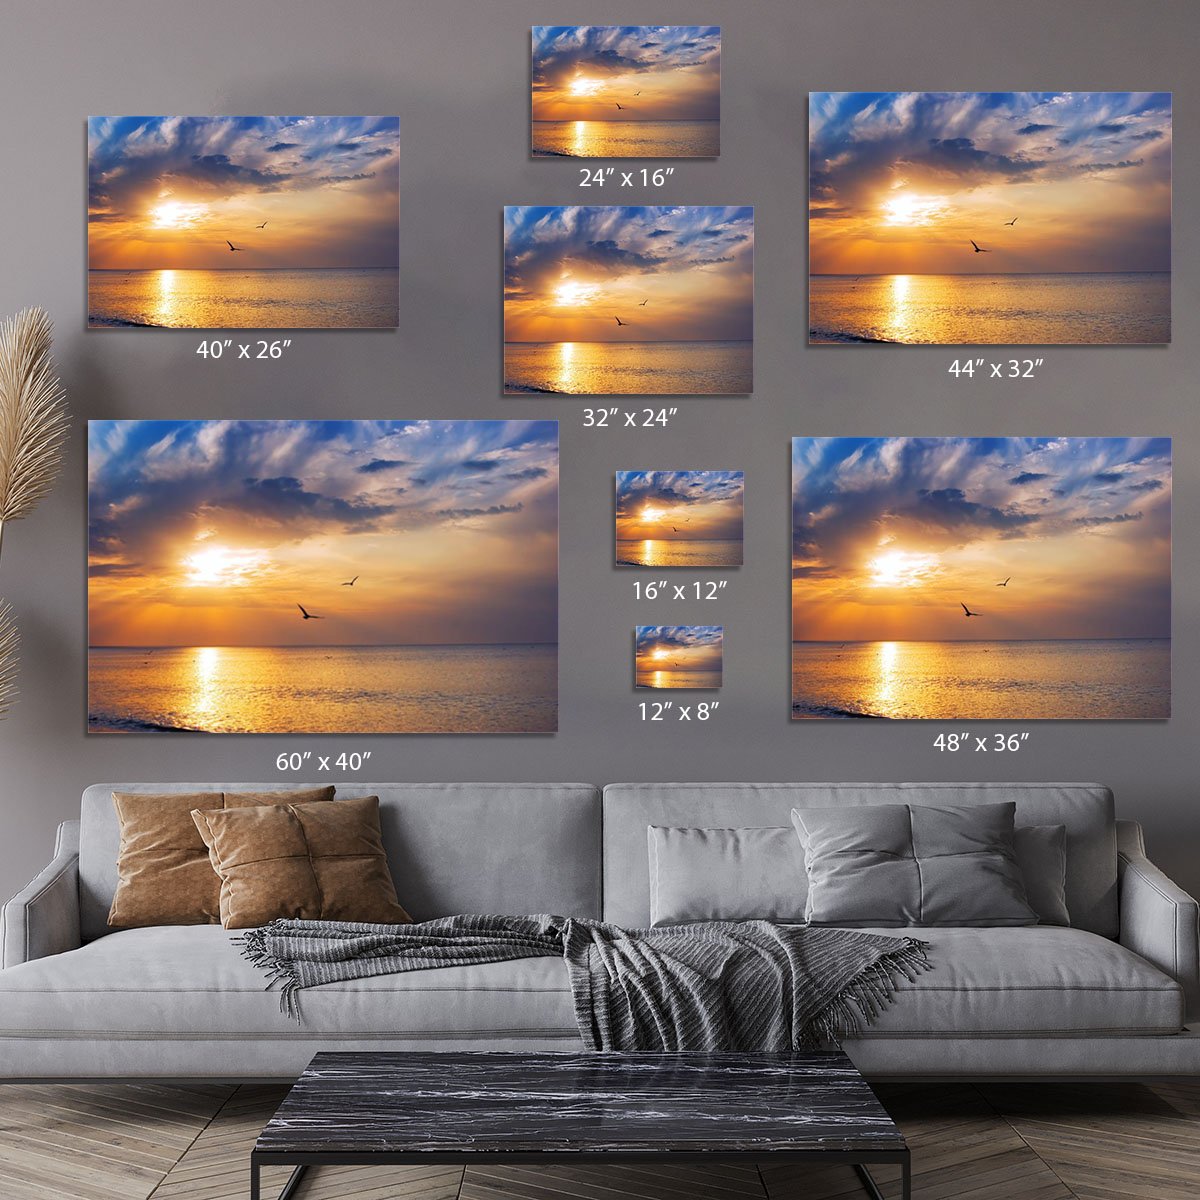 Early morning sunrise over the sea and a birds Canvas Print or Poster